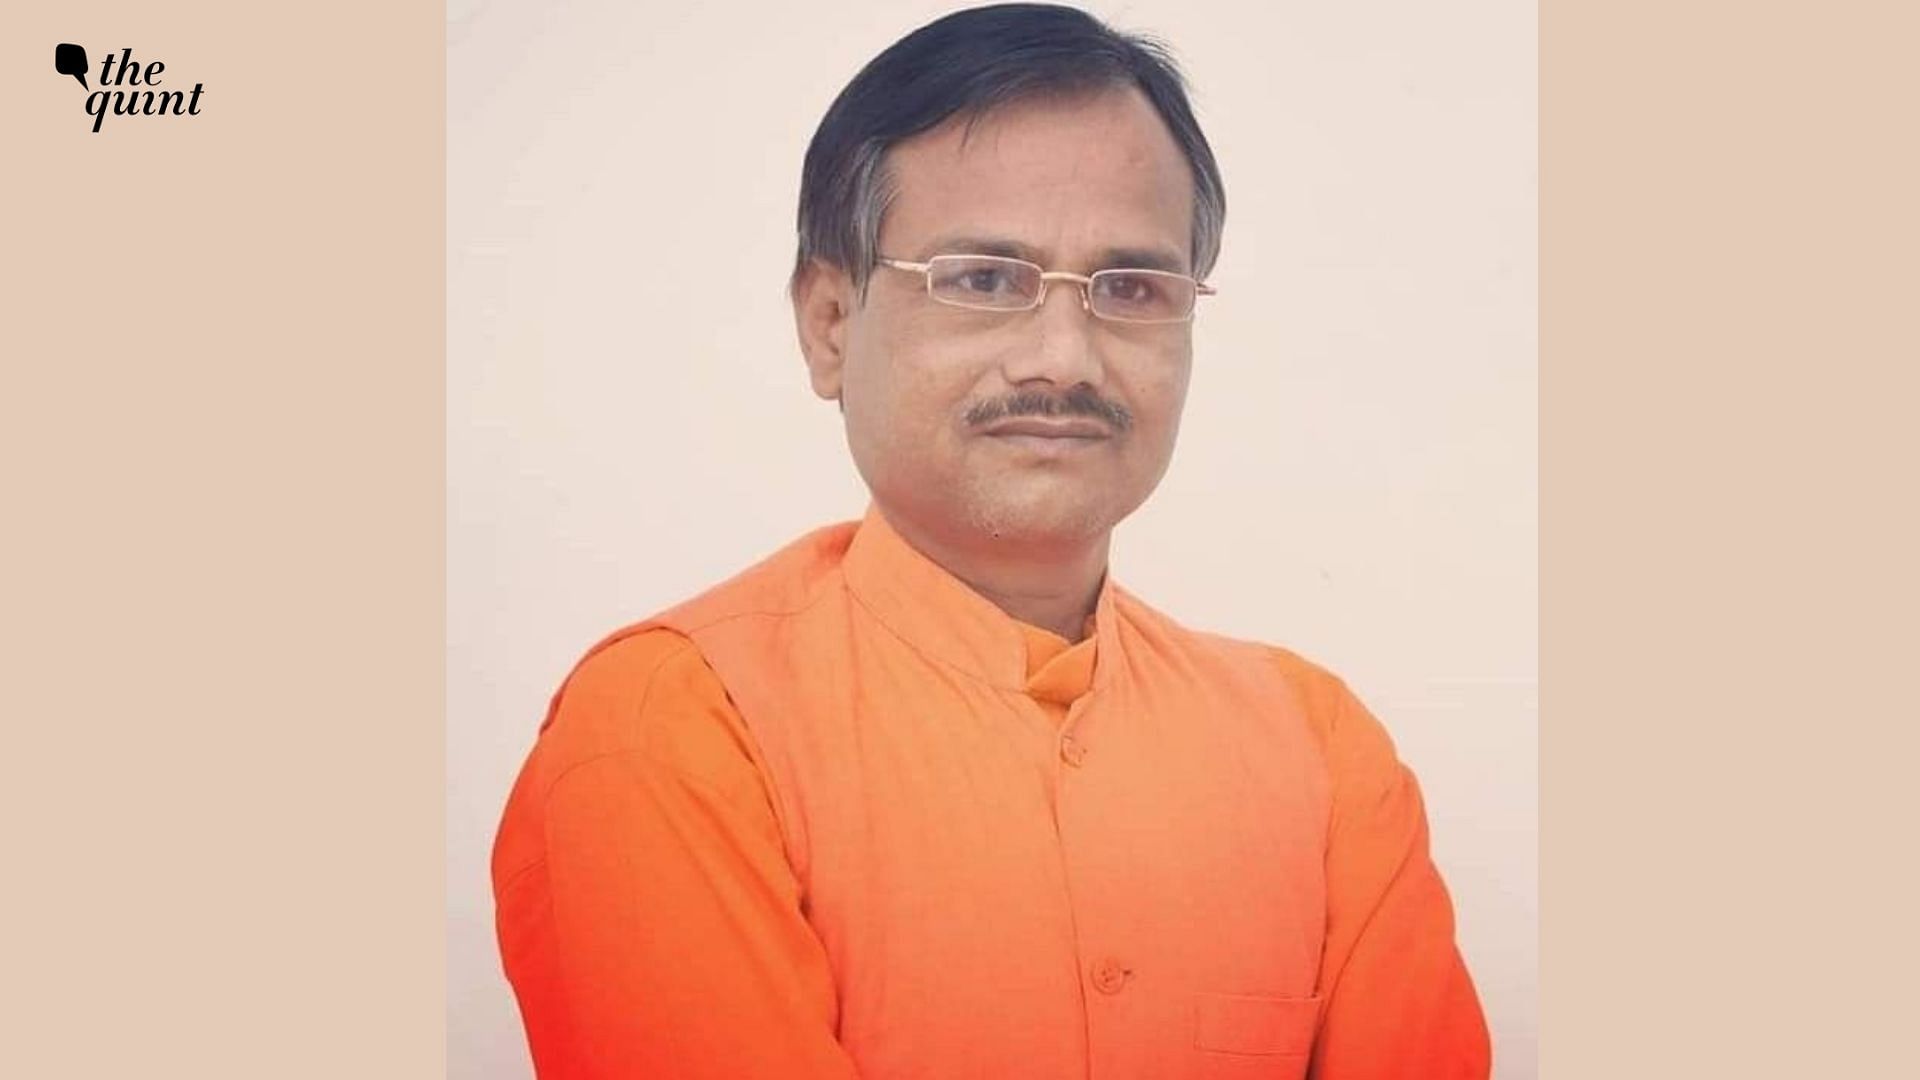 Kamlesh Tiwari, who was earlier associated with a faction of the Hindu Mahasabha, was found dead in Lucknow.